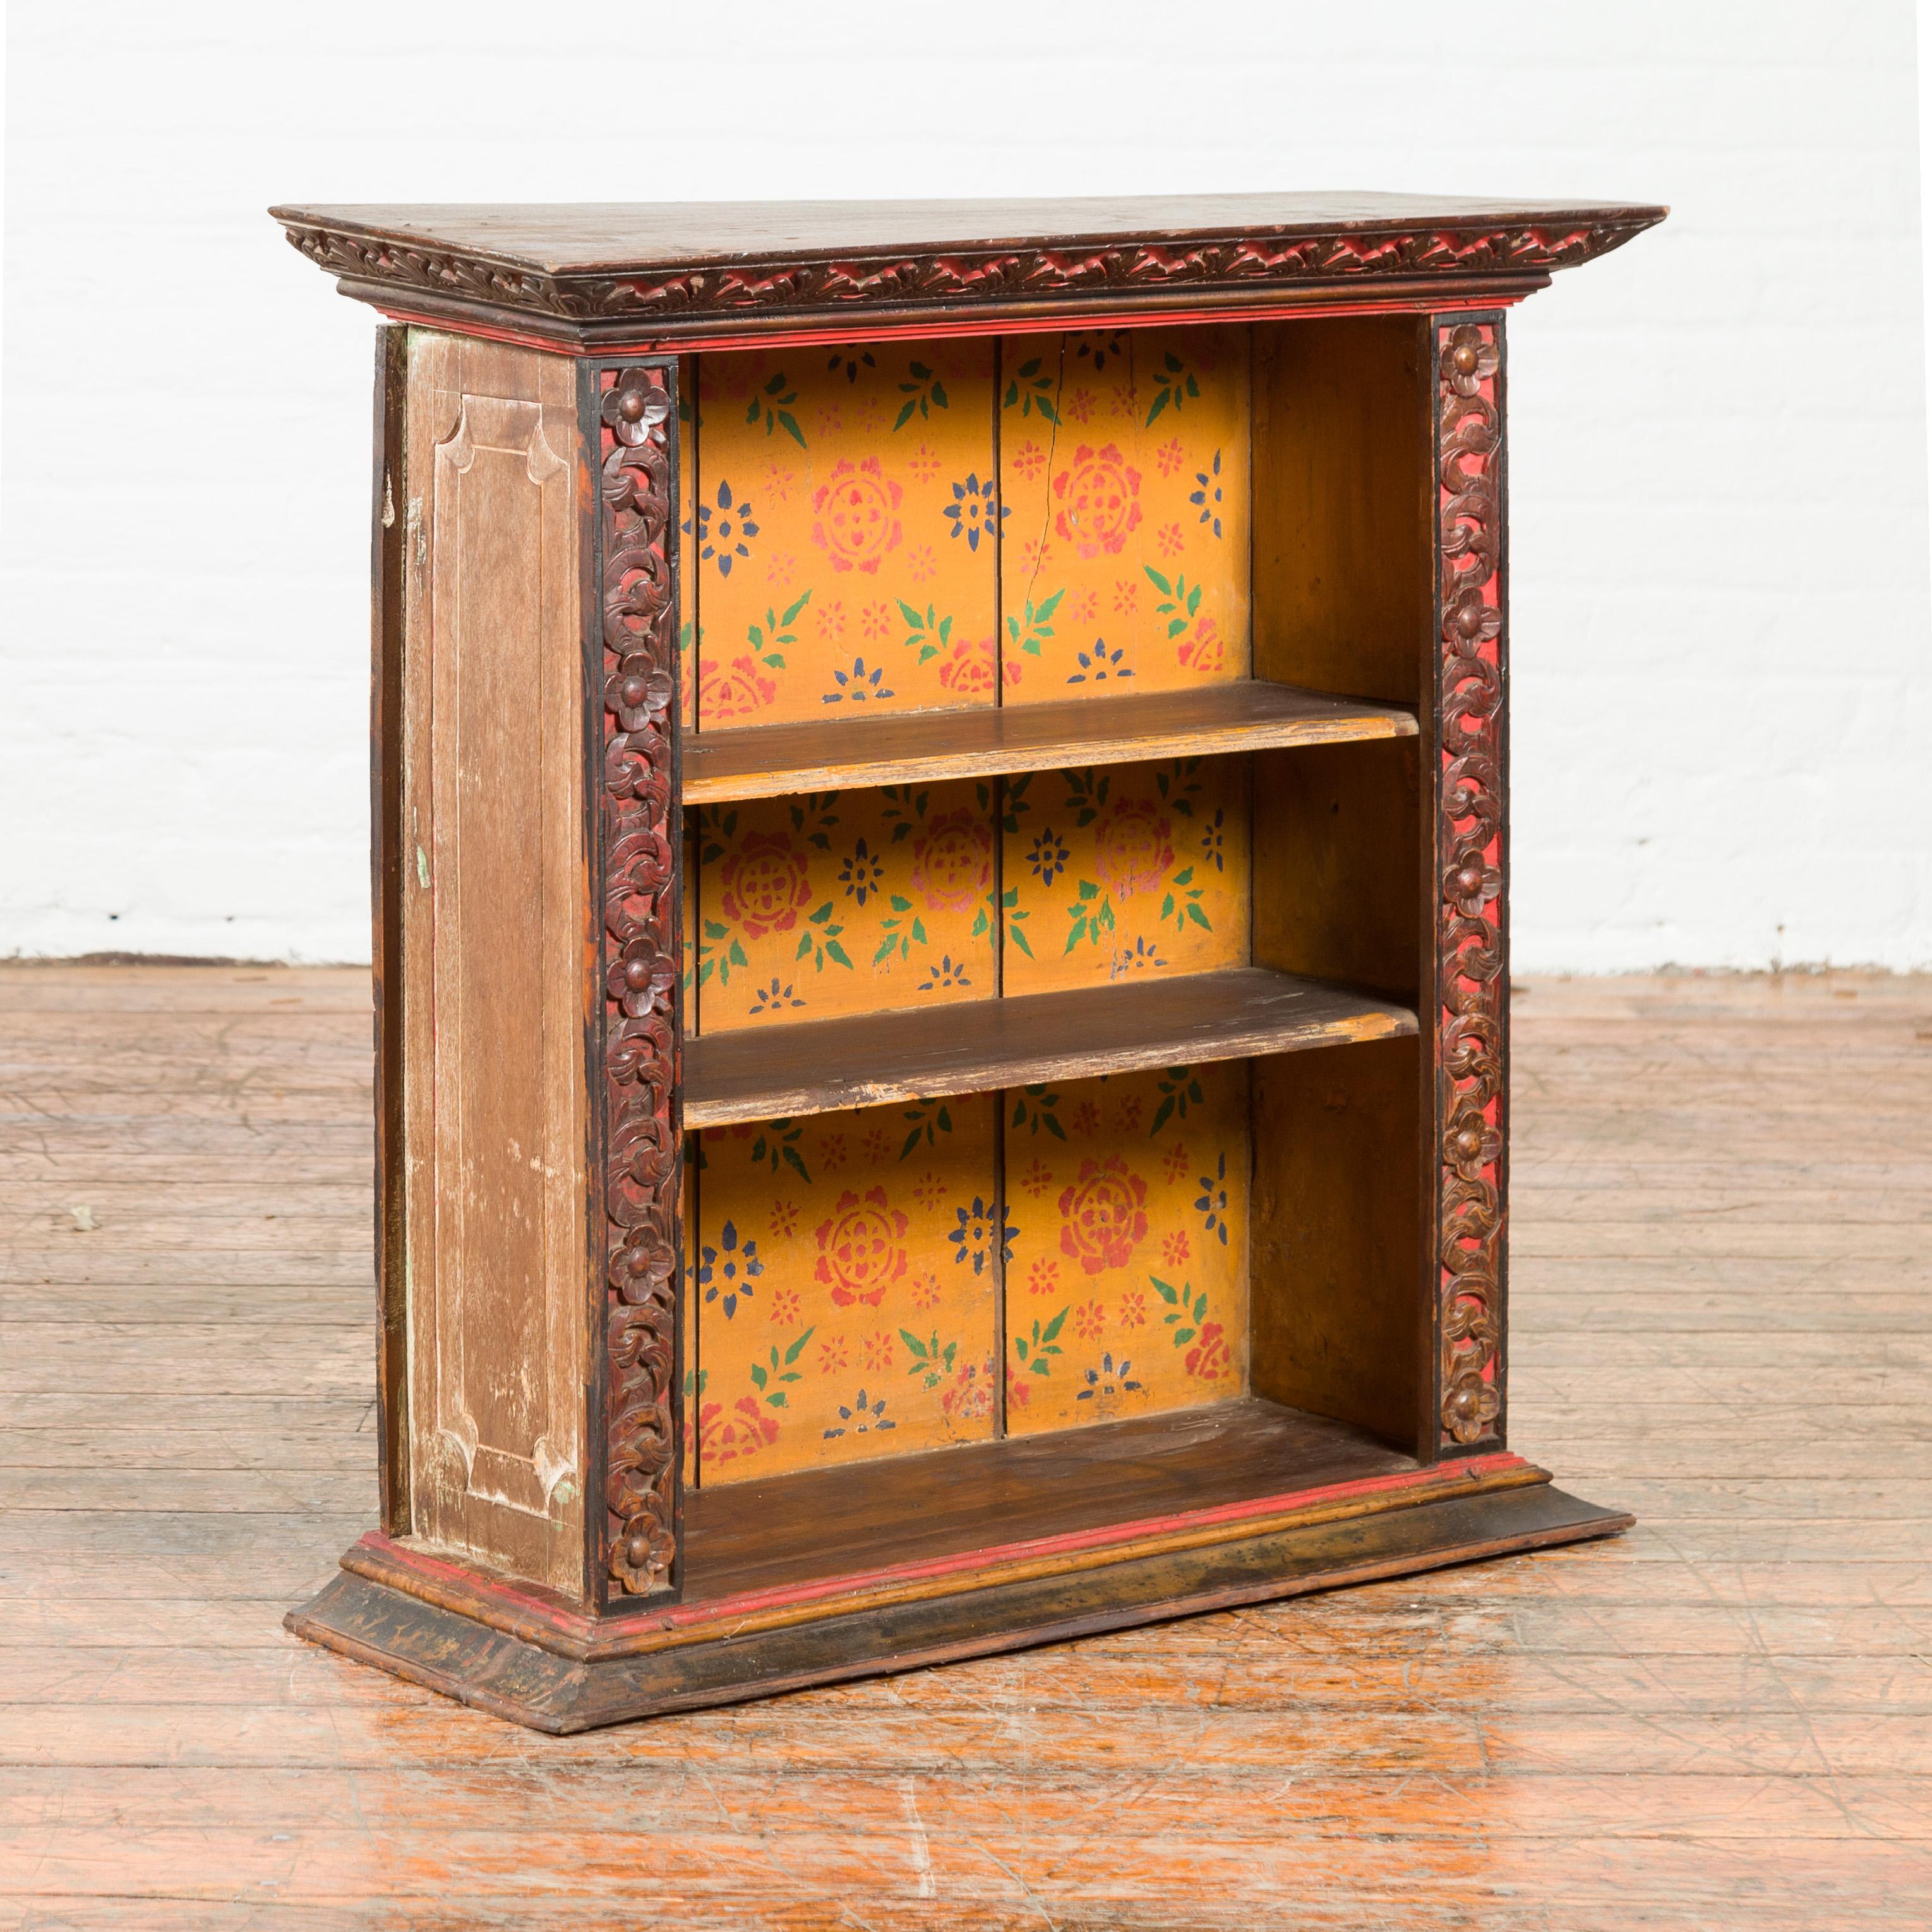 Antique Indian 19th Century Wall Display Cabinet with Carved Floral Motifs For Sale 2